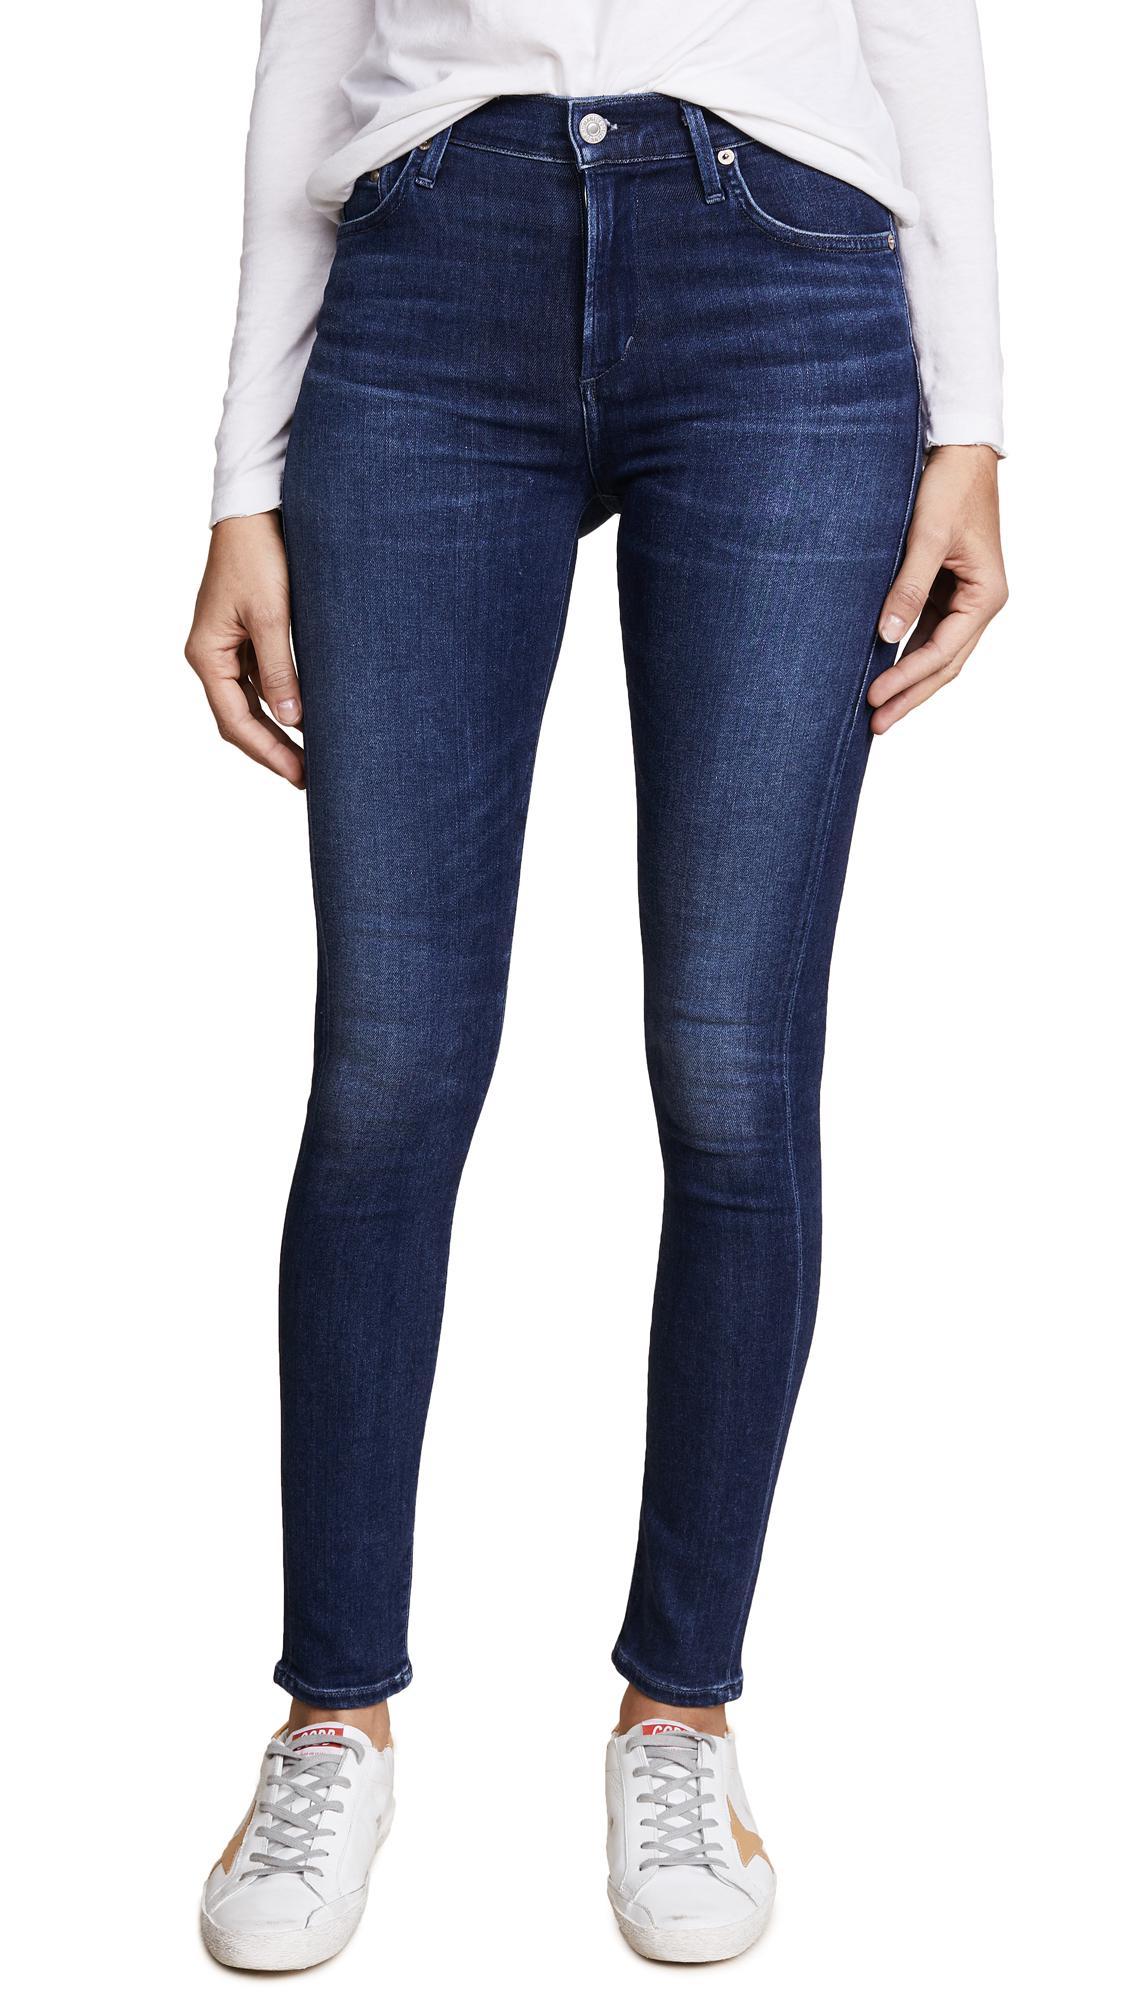 Lyst - Citizens Of Humanity Rocket Sculpt High Rise Skinny Jeans in Blue